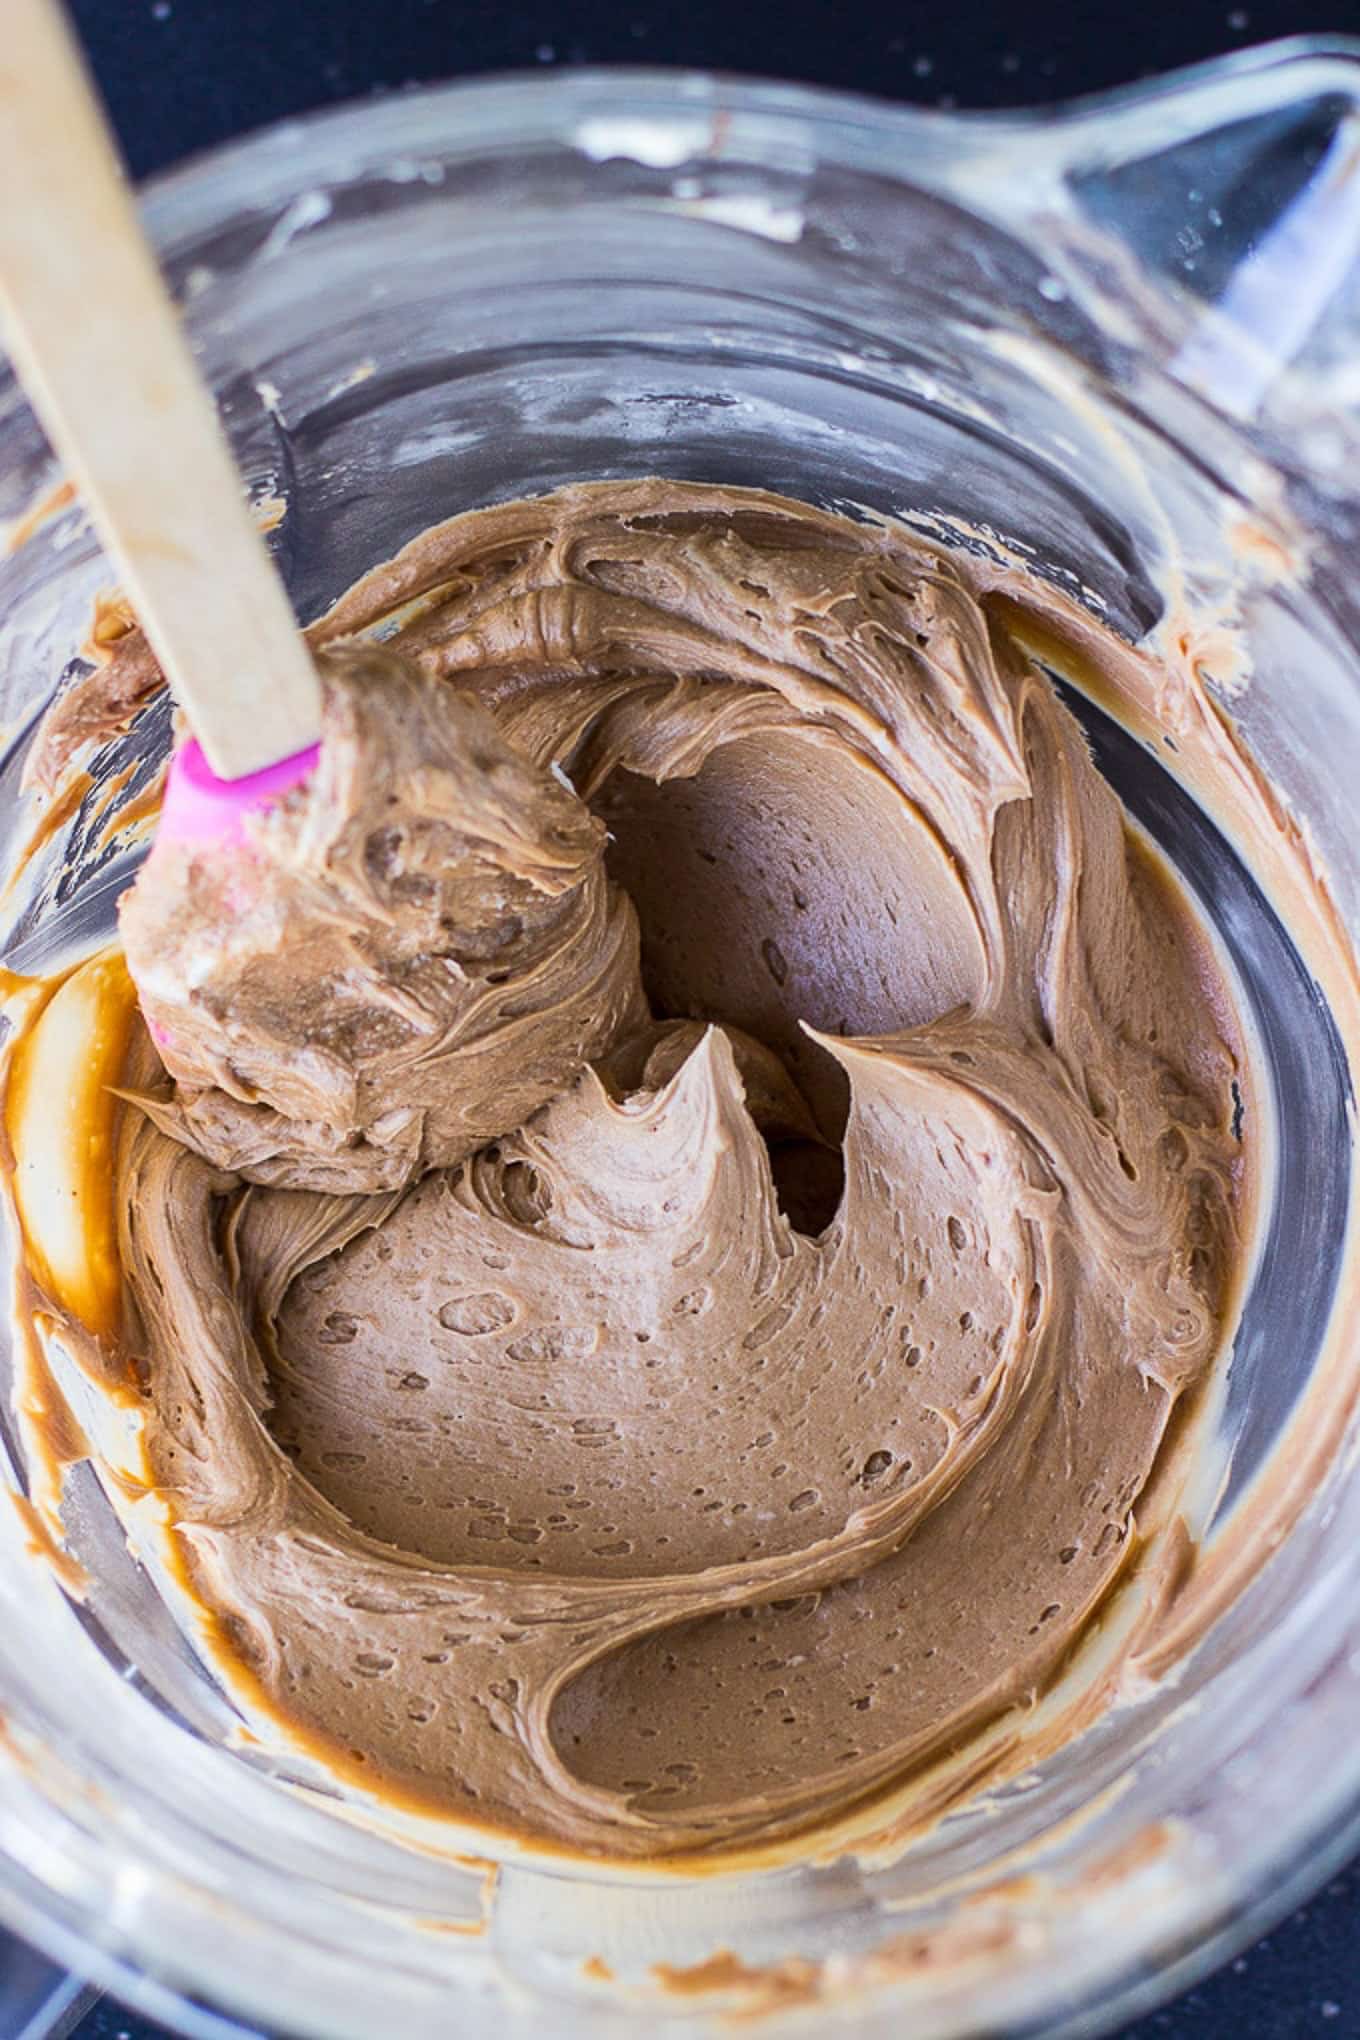 Chocolate frosting in a glass bowl with a spatula stirring it around.